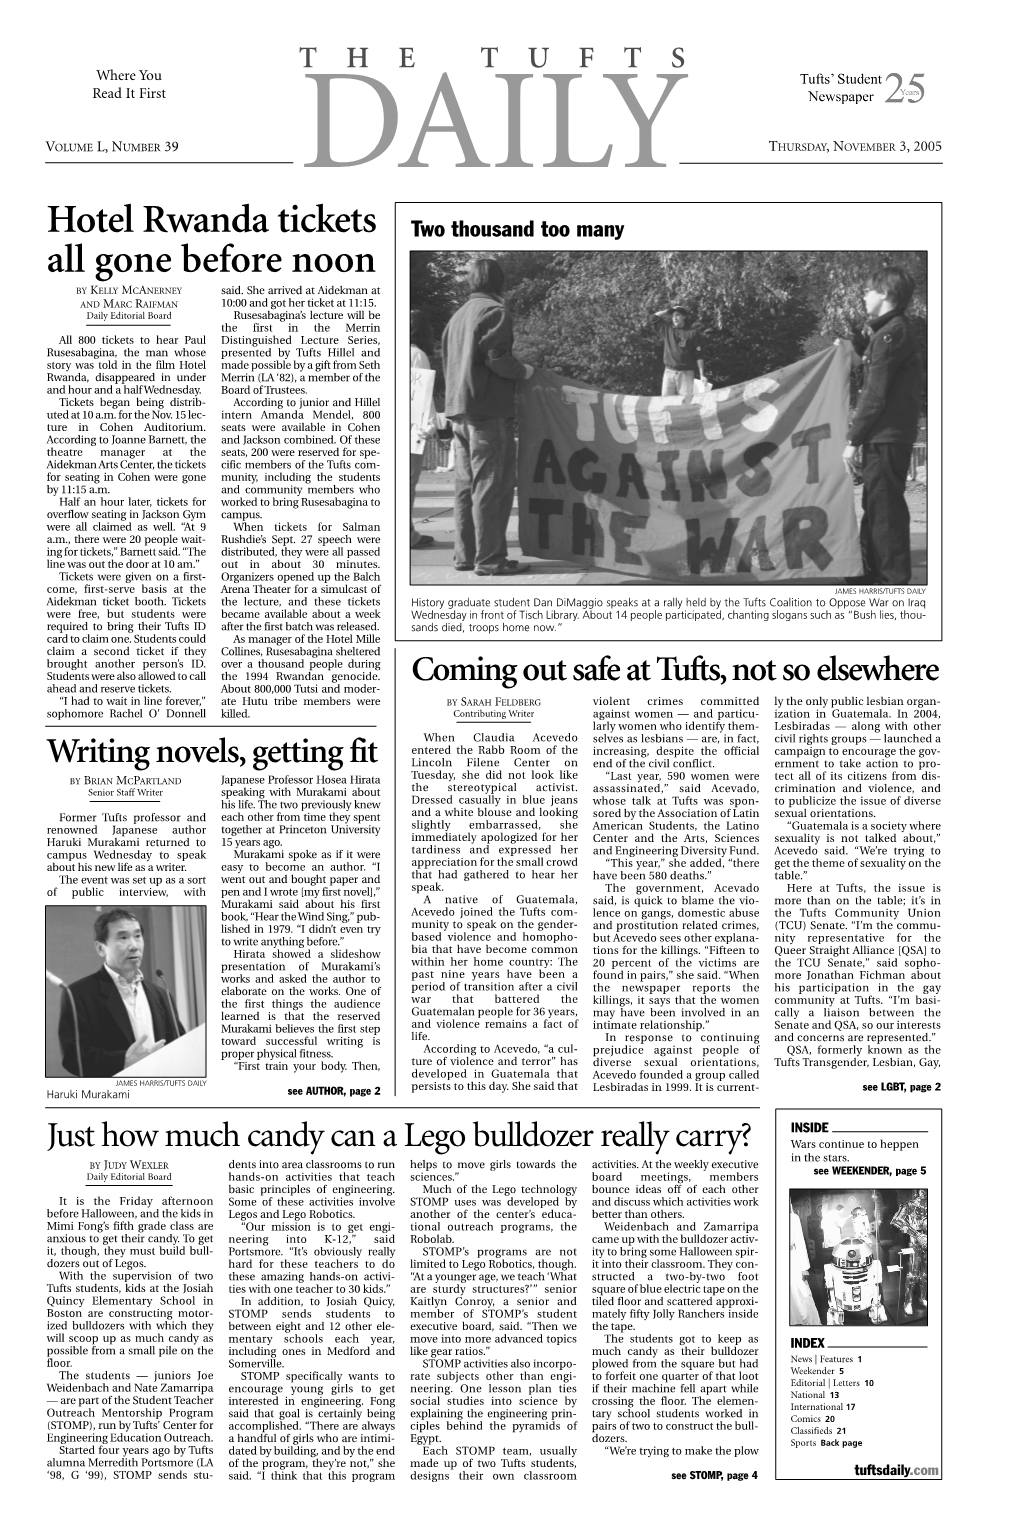 THE TUFTS DAILY NEWS | FEATURES Thursday, November 3, 2005 POLICE BRIEFS U.S